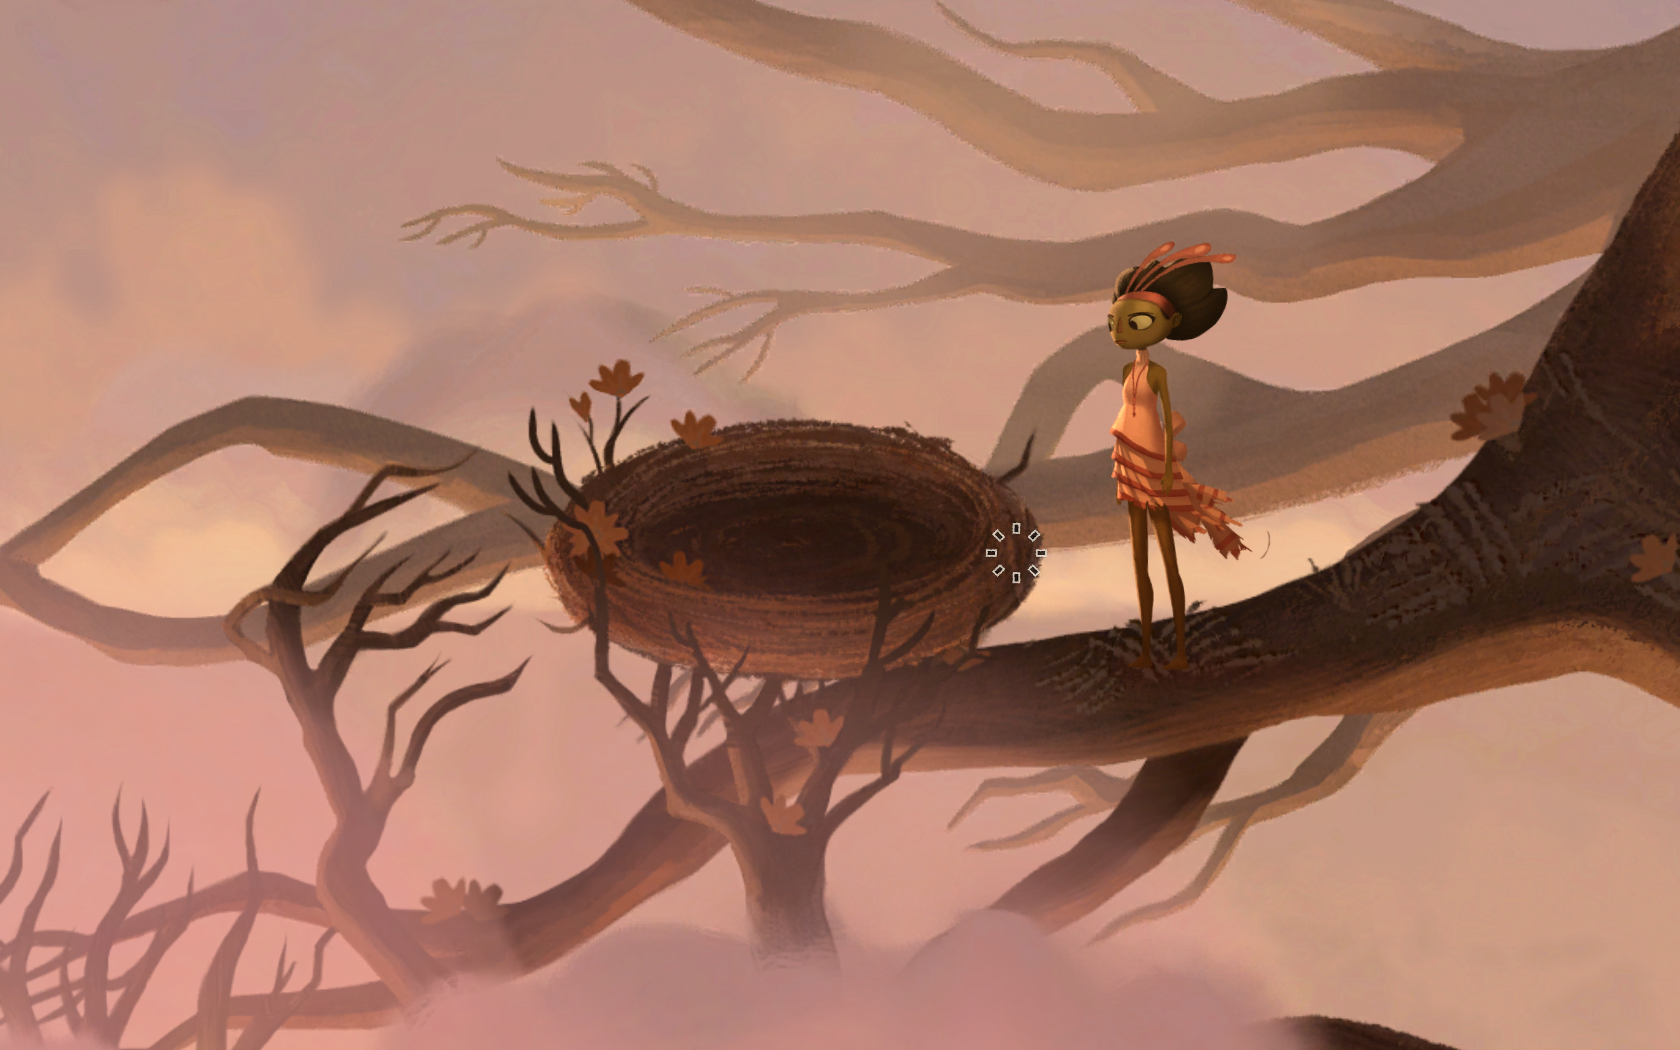 “Broken Age: Act 2” Pushed to 2015 - Game Currently in Alpha Stage